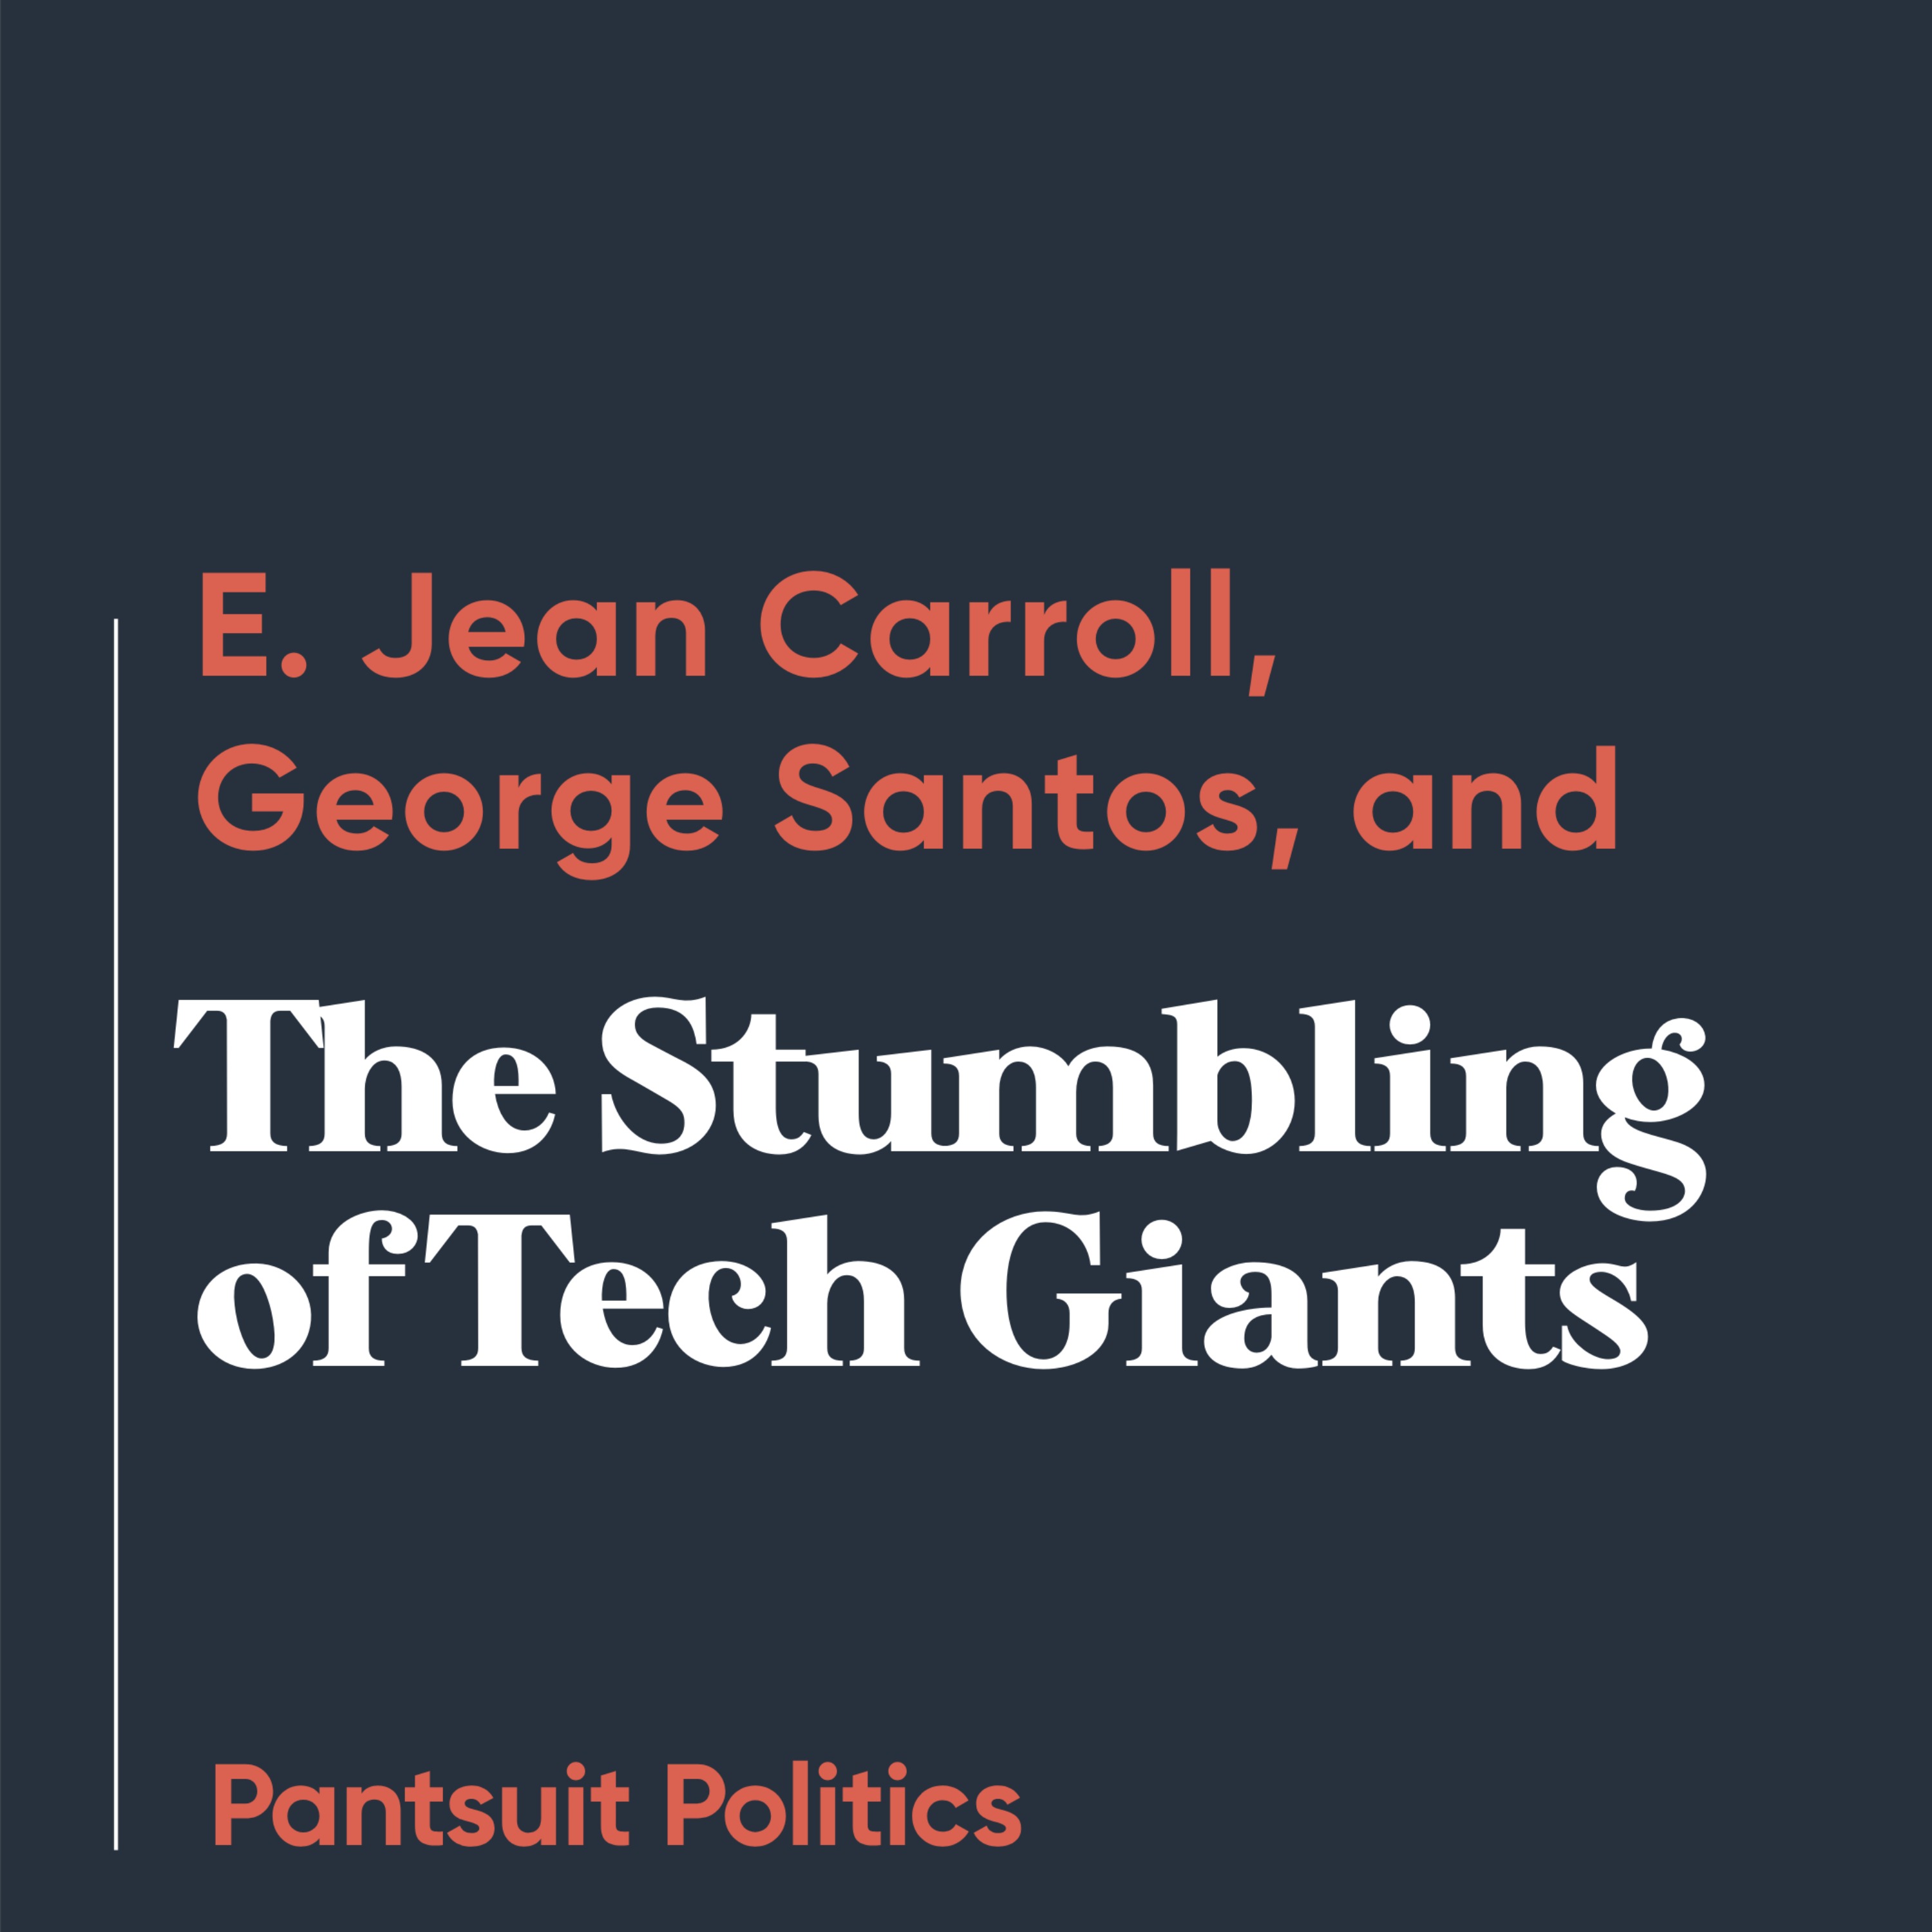 E. Jean Carroll, George Santos, and the Stumbling of Tech Giants